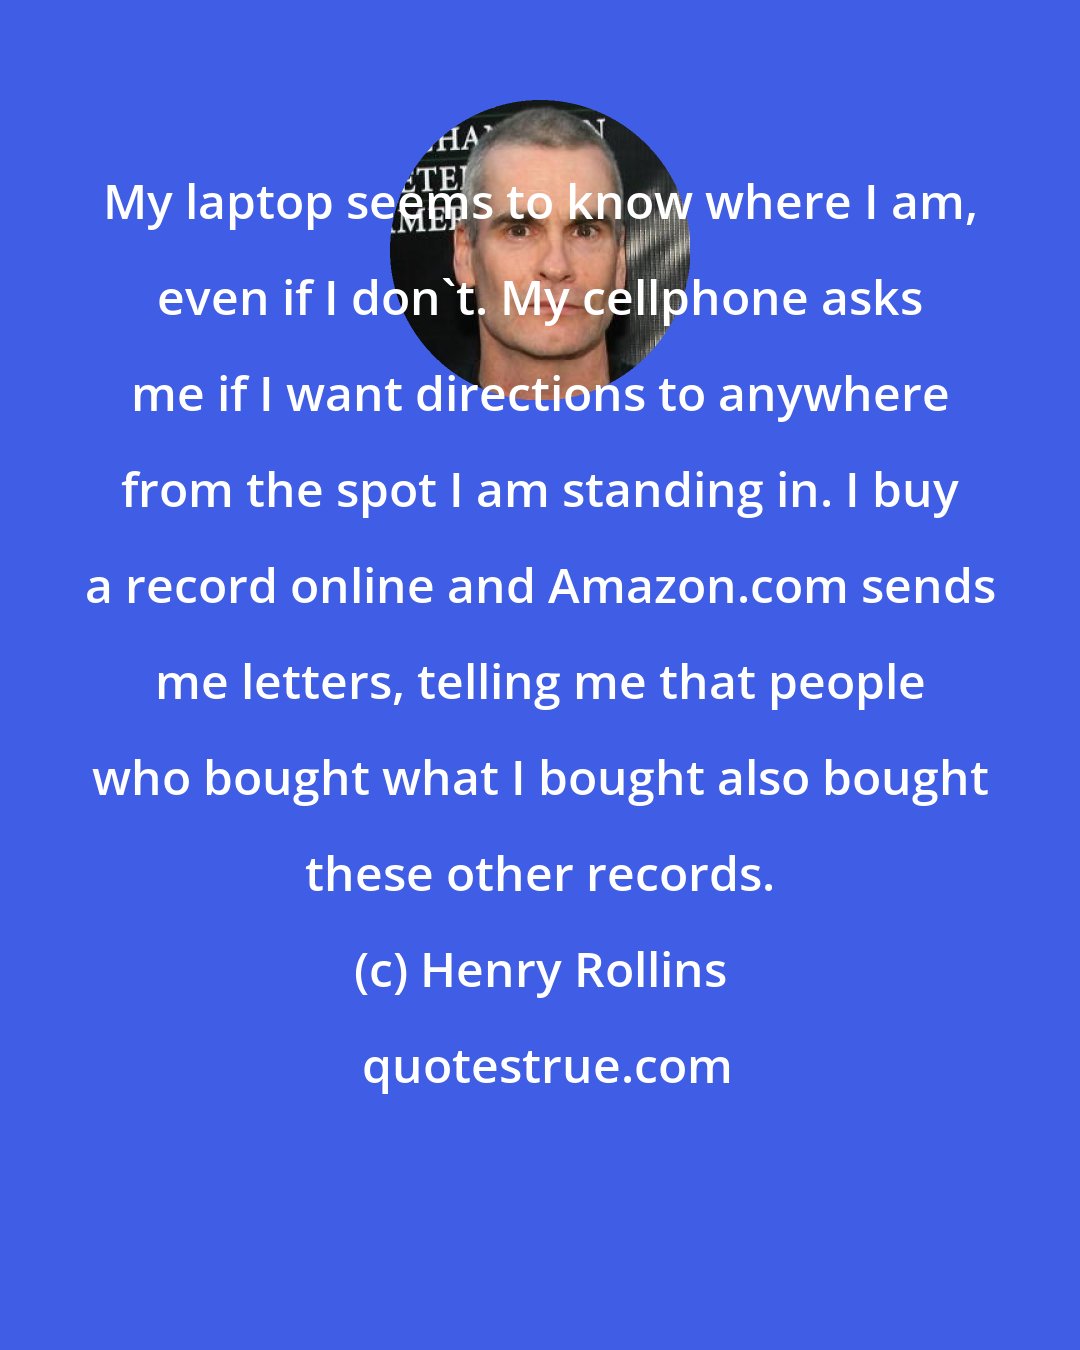 Henry Rollins: My laptop seems to know where I am, even if I don't. My cellphone asks me if I want directions to anywhere from the spot I am standing in. I buy a record online and Amazon.com sends me letters, telling me that people who bought what I bought also bought these other records.